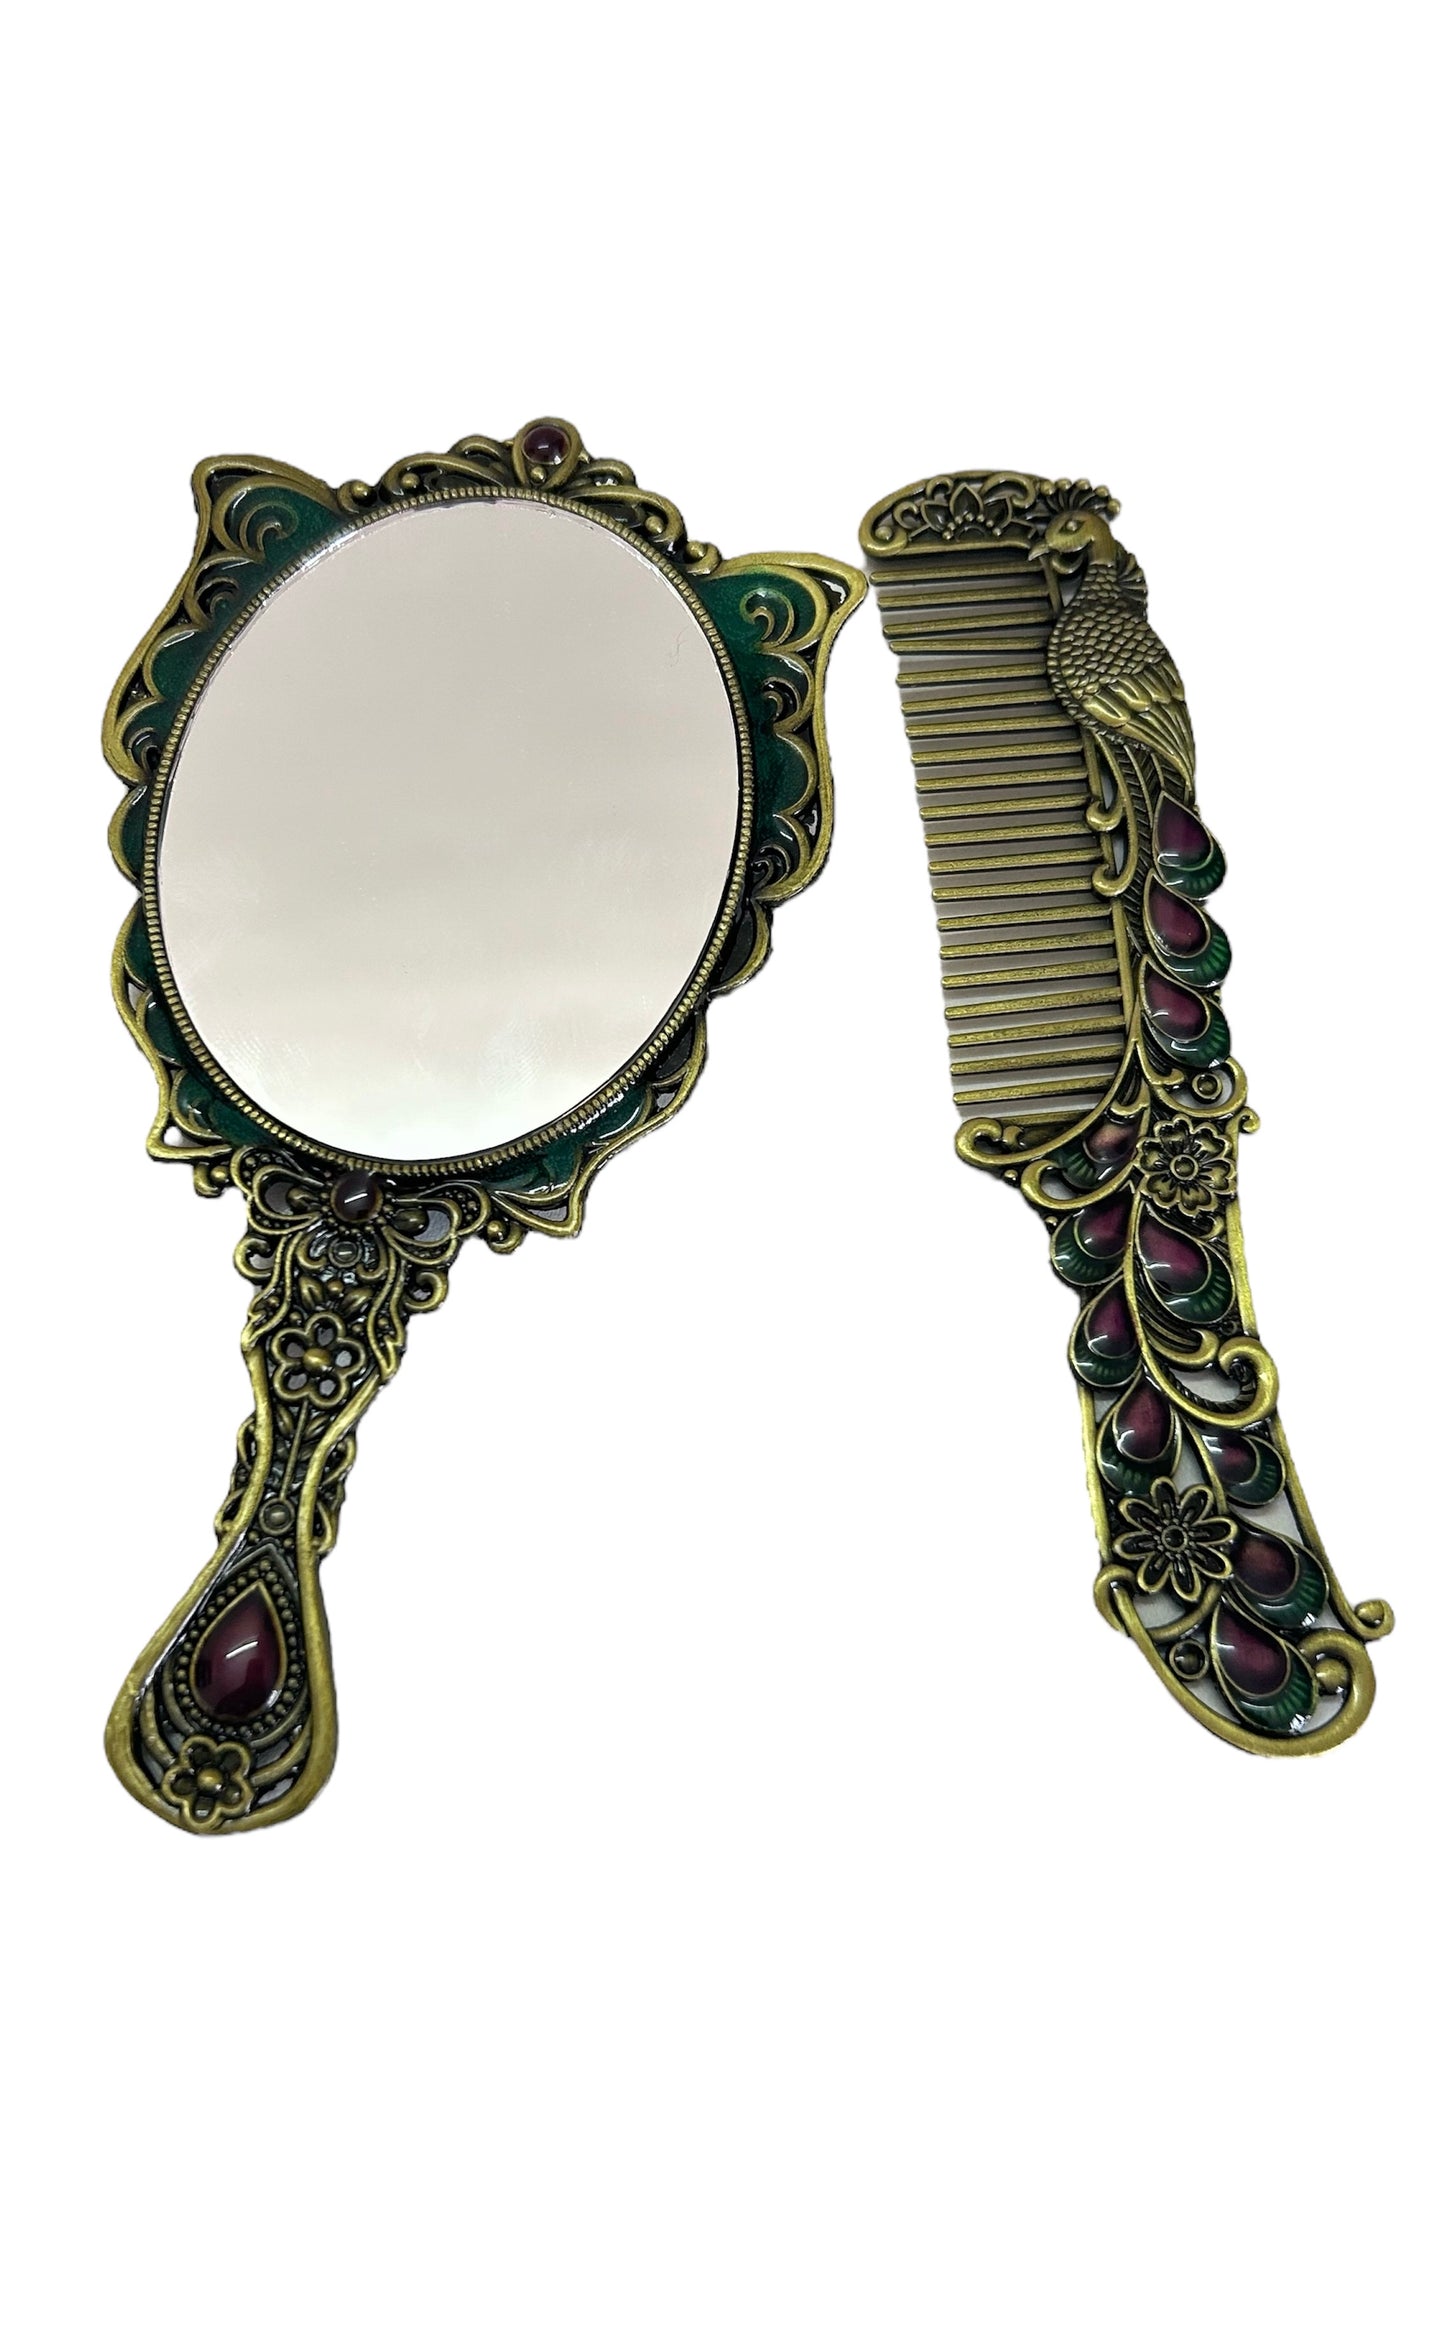 Butterfly comb mirror set